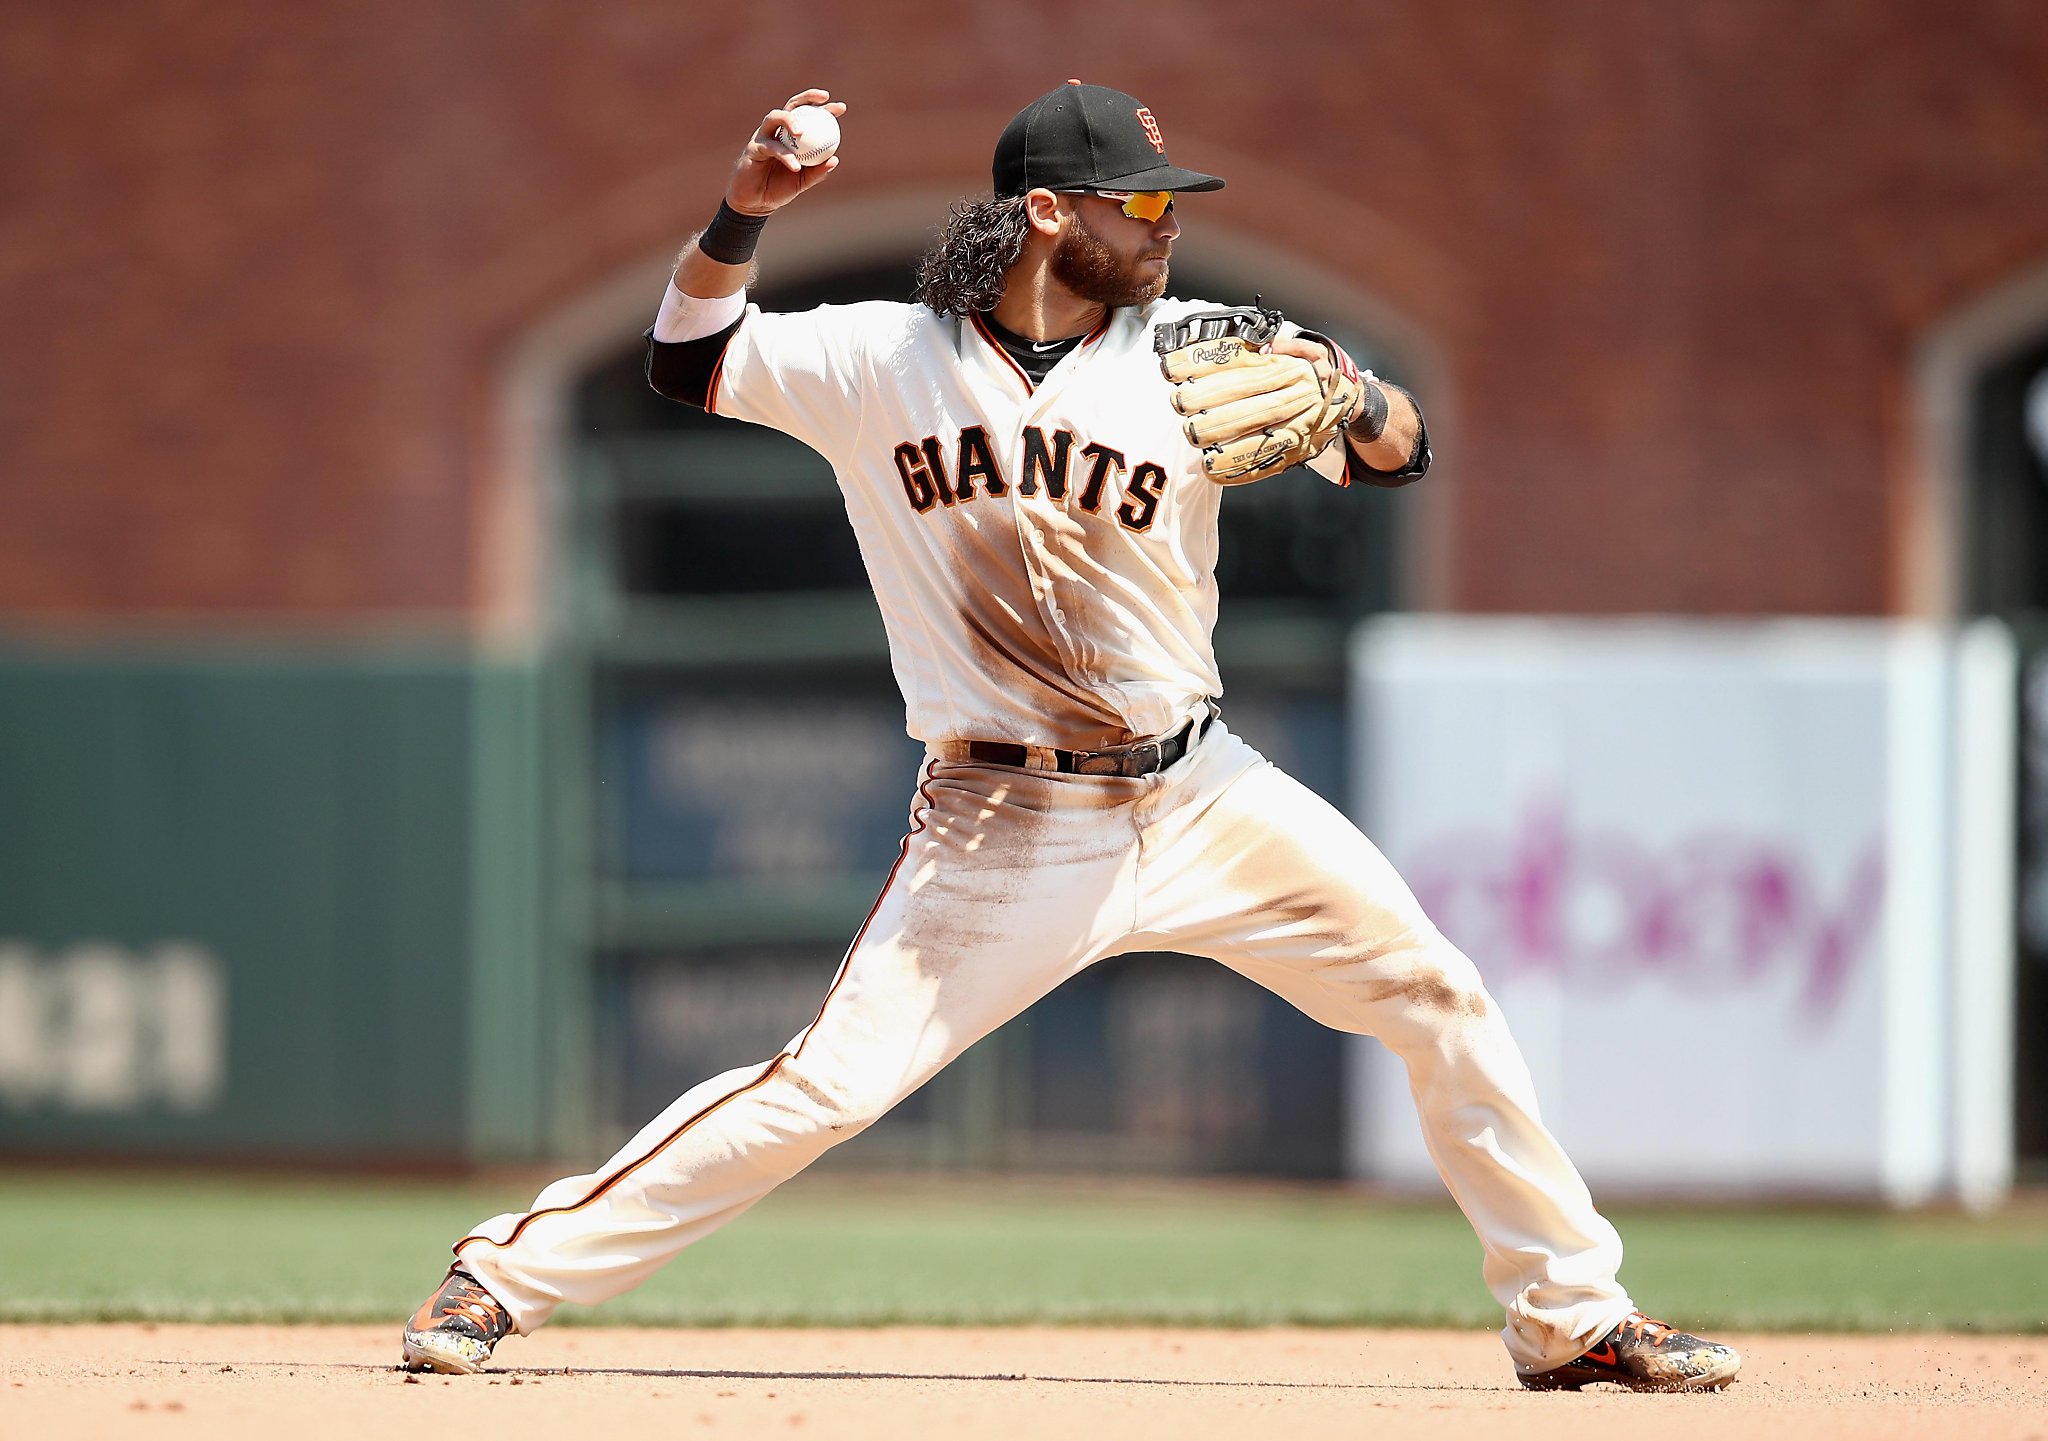 The Gentle Giant: Catching Up With Brandon Crawford